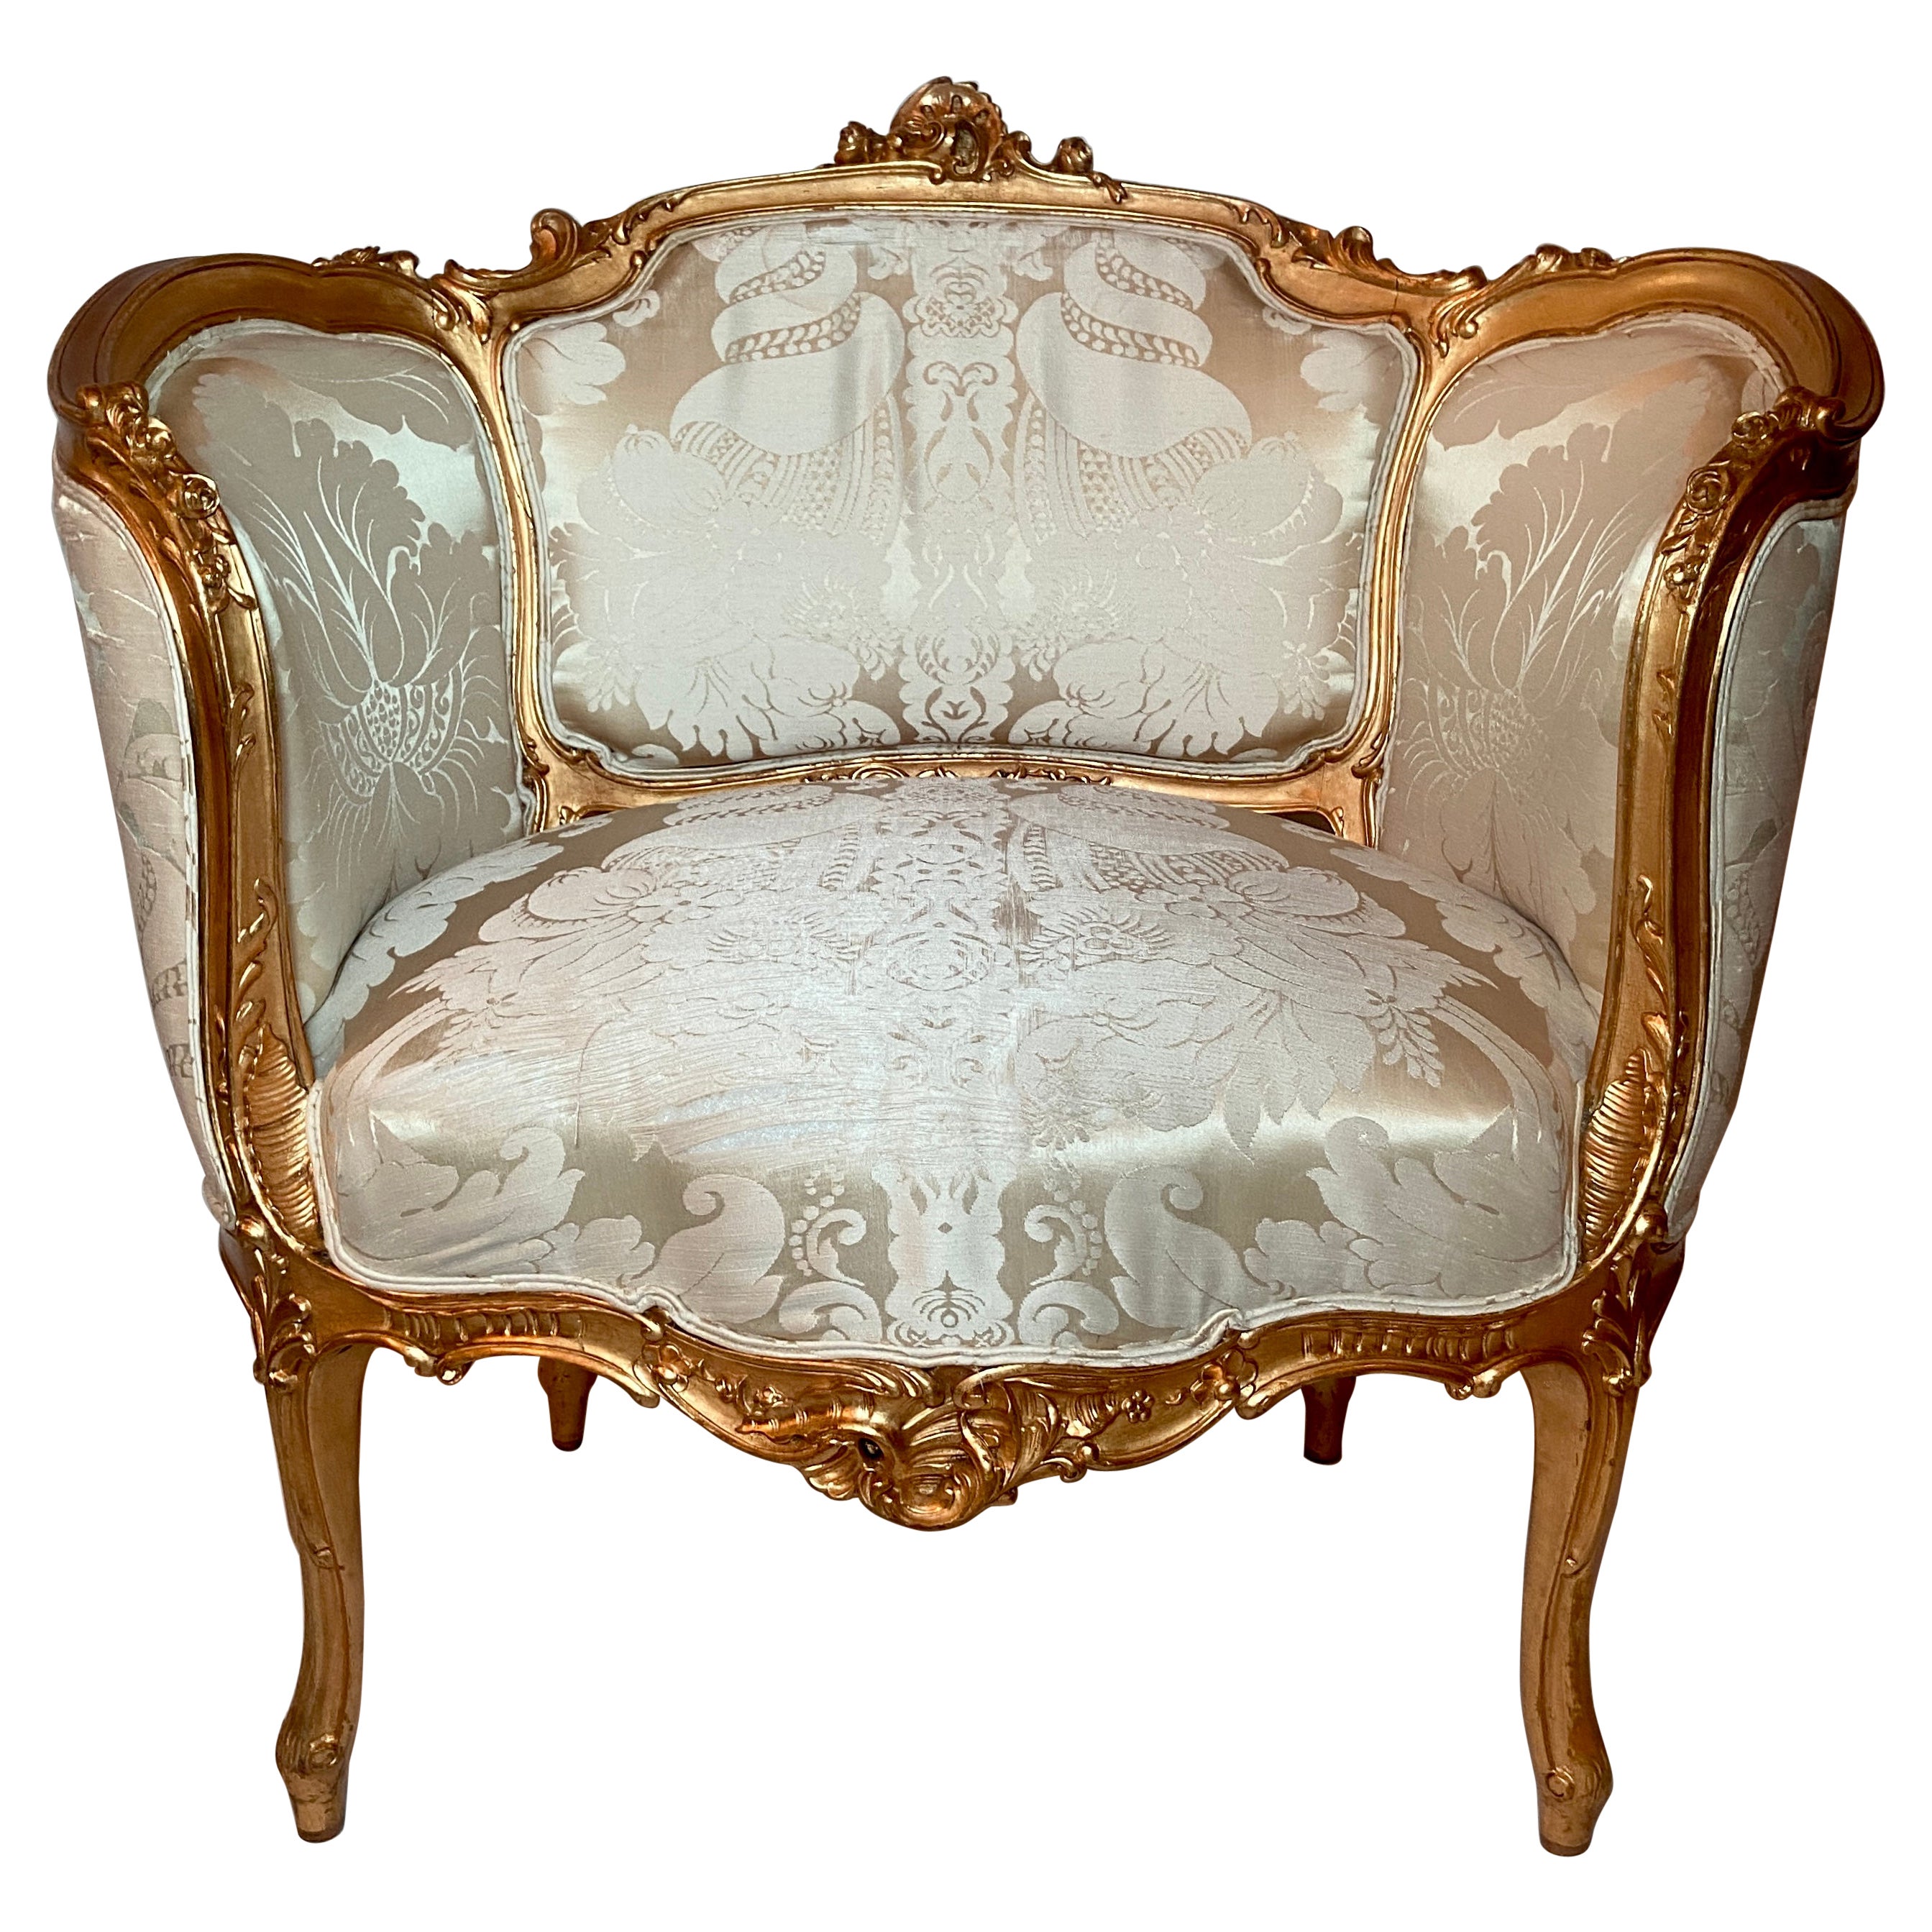 Antique French Gold Leaf "Coseuse" or Armchair, Circa 1880-1890